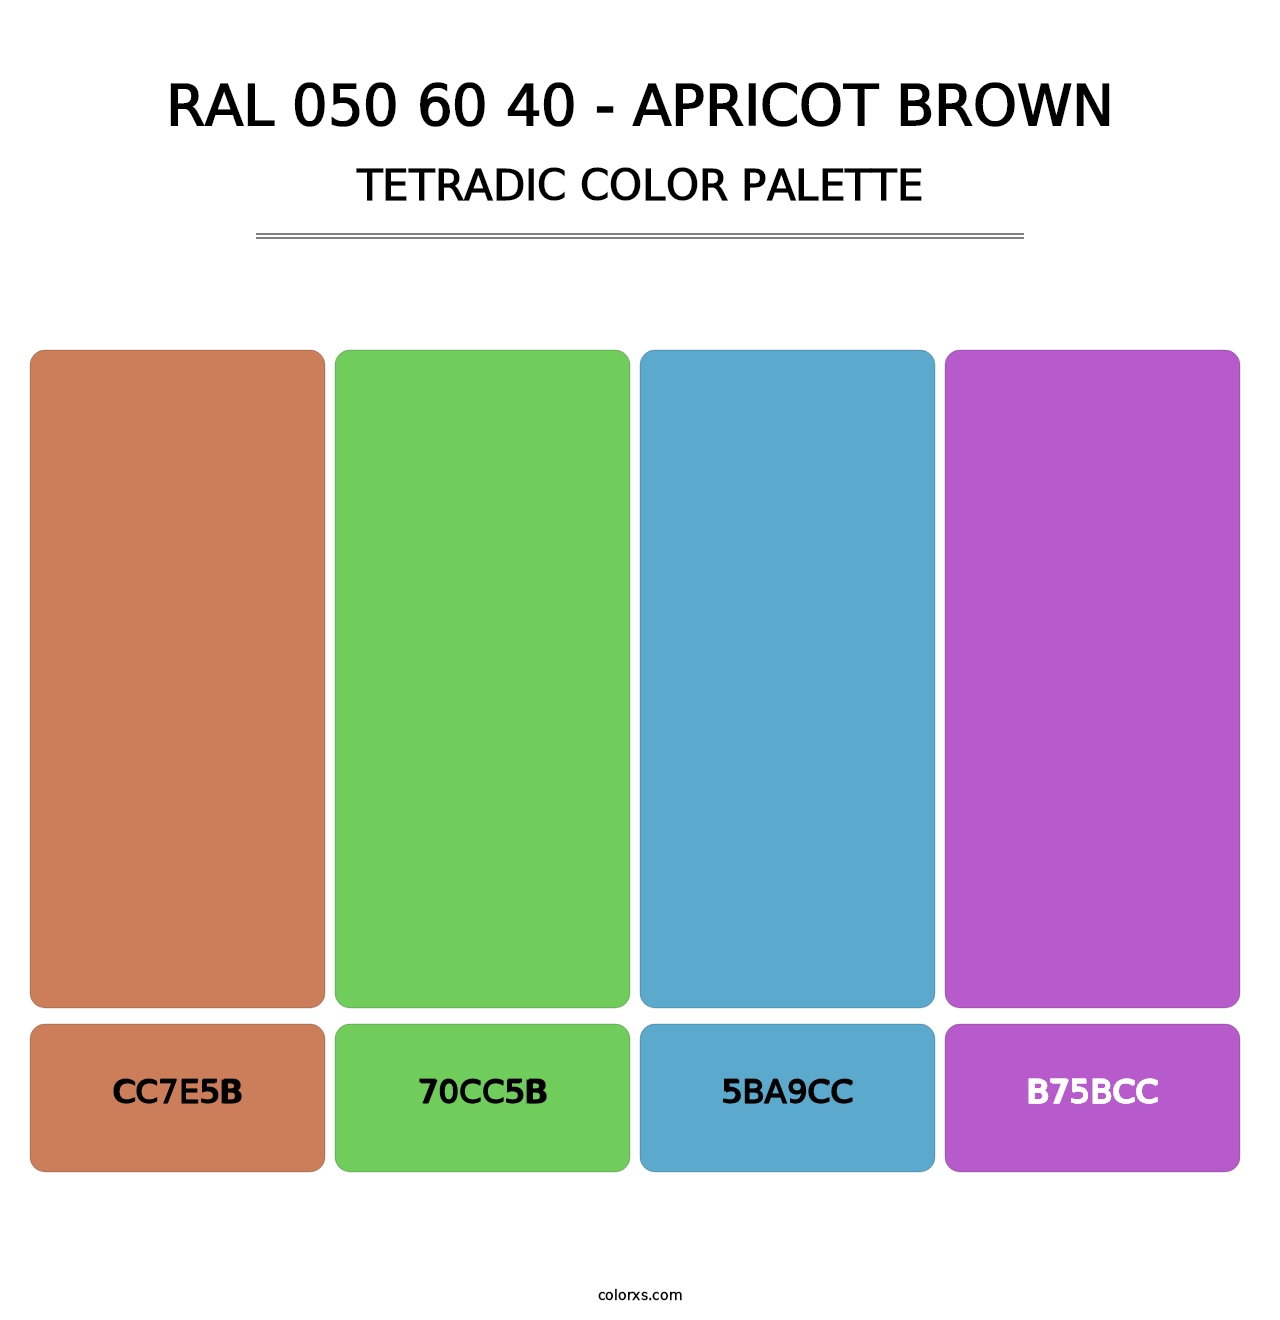 RAL 050 60 40 - Apricot Brown - Tetradic Color Palette